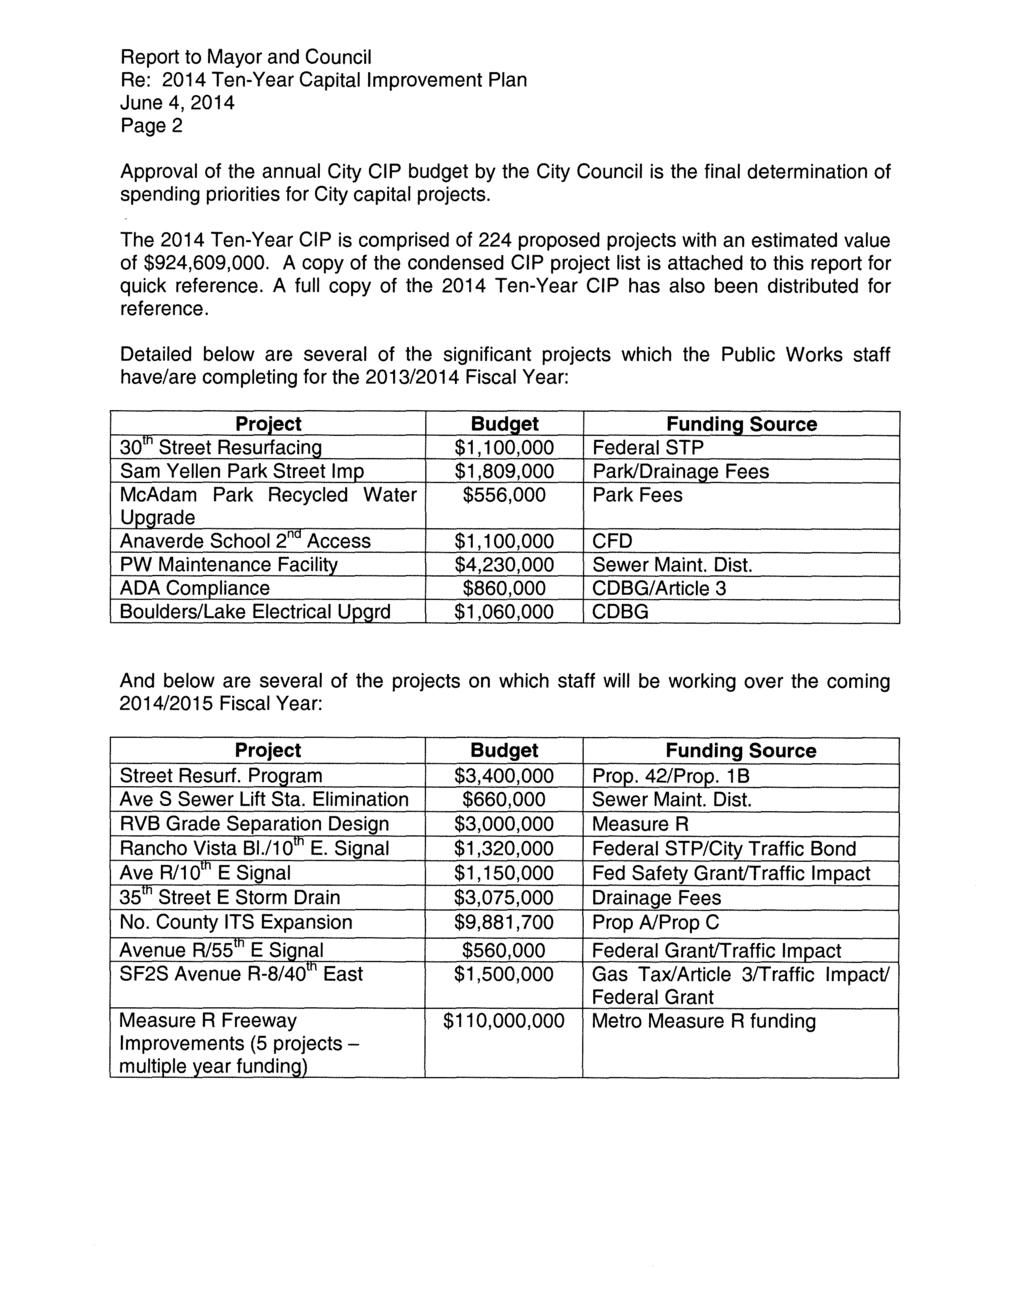 Report to Mayor and Council Re: 2014 Ten-Year Capital Improvement Plan June 4, 2014 Page 2 Approval of the annual City GIP budget by the City Council is the final determination of spending priorities